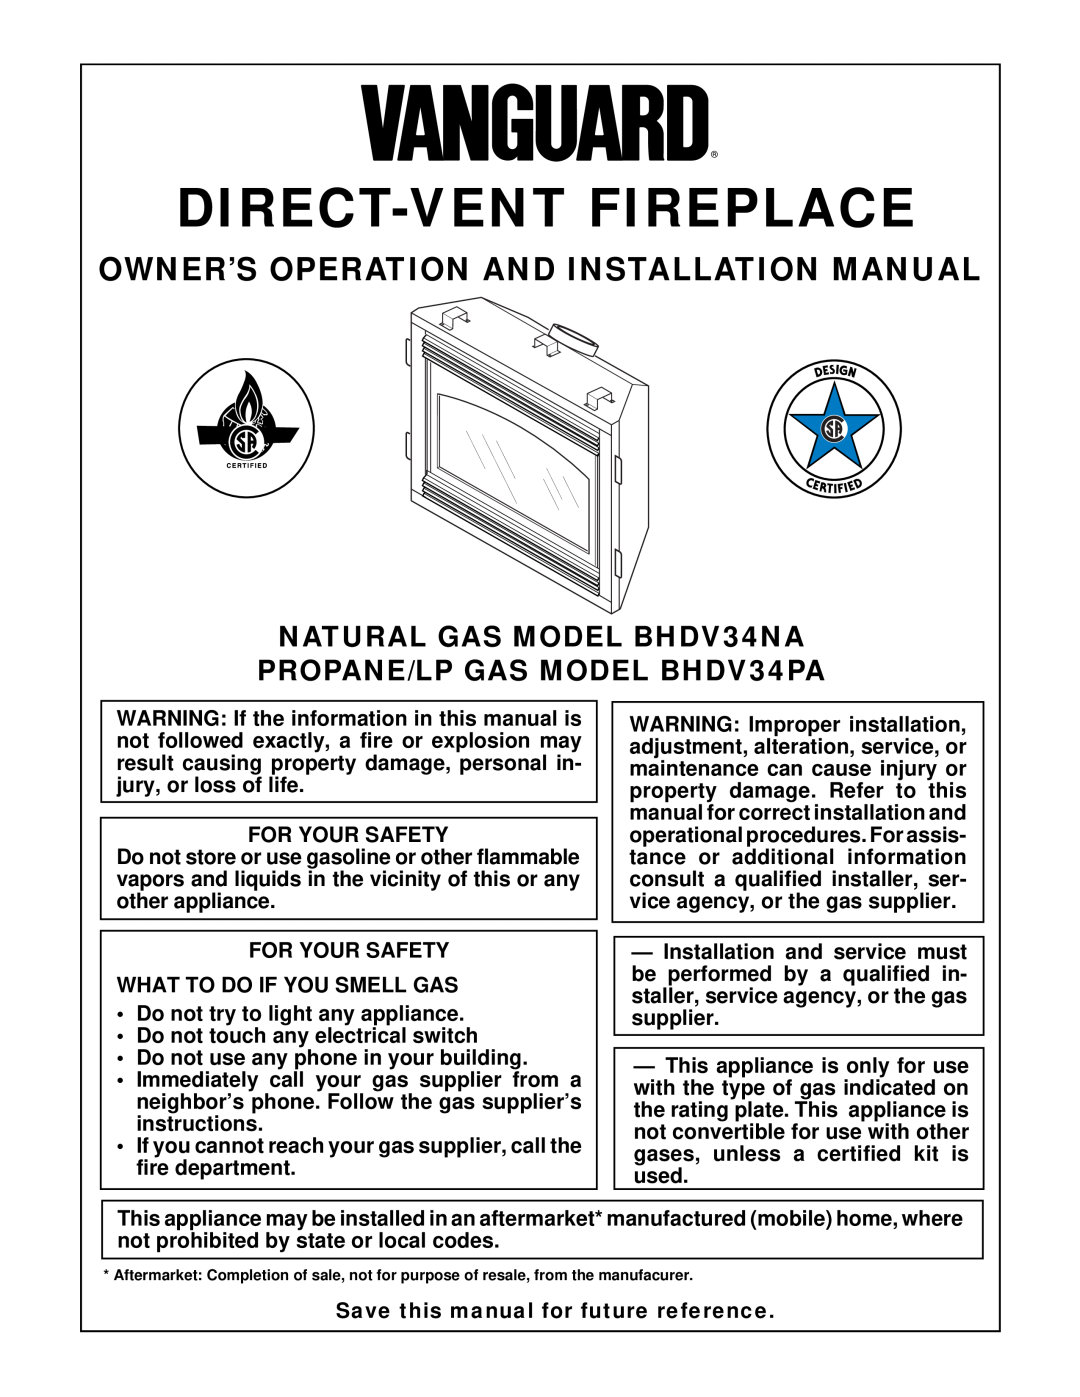 Desa BHDV34PA installation manual Owner’S Operation And Installation Manual, NATURAL GAS MODEL BHDV34NA, For Your Safety 